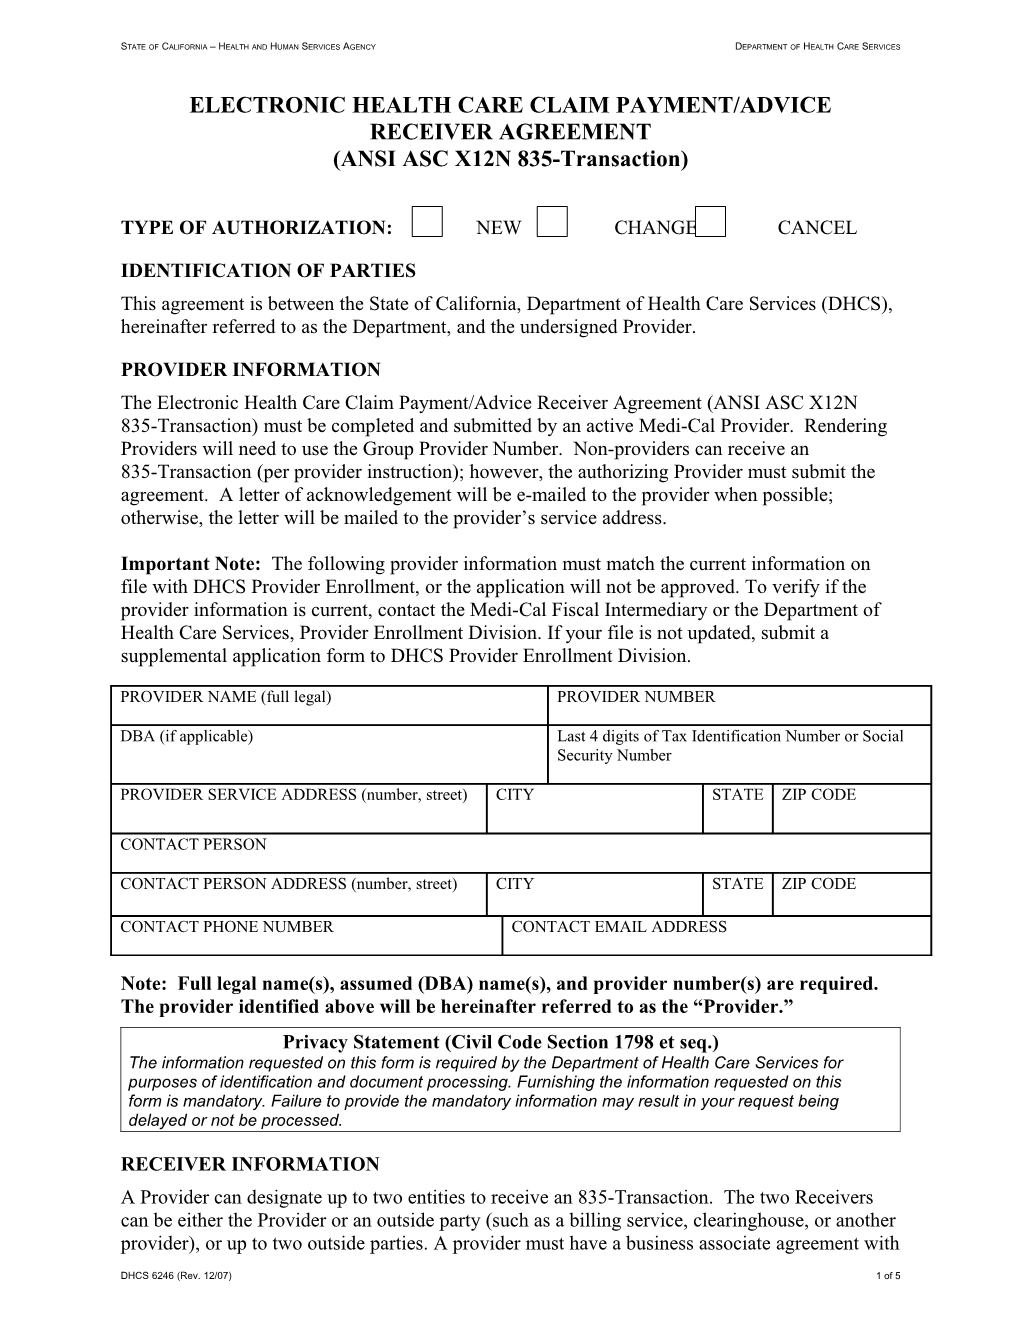 Form: Electronic Health Care Claim Payment/Advice Receiver Agreement (ANSI ASC X12N 835 Transaction)